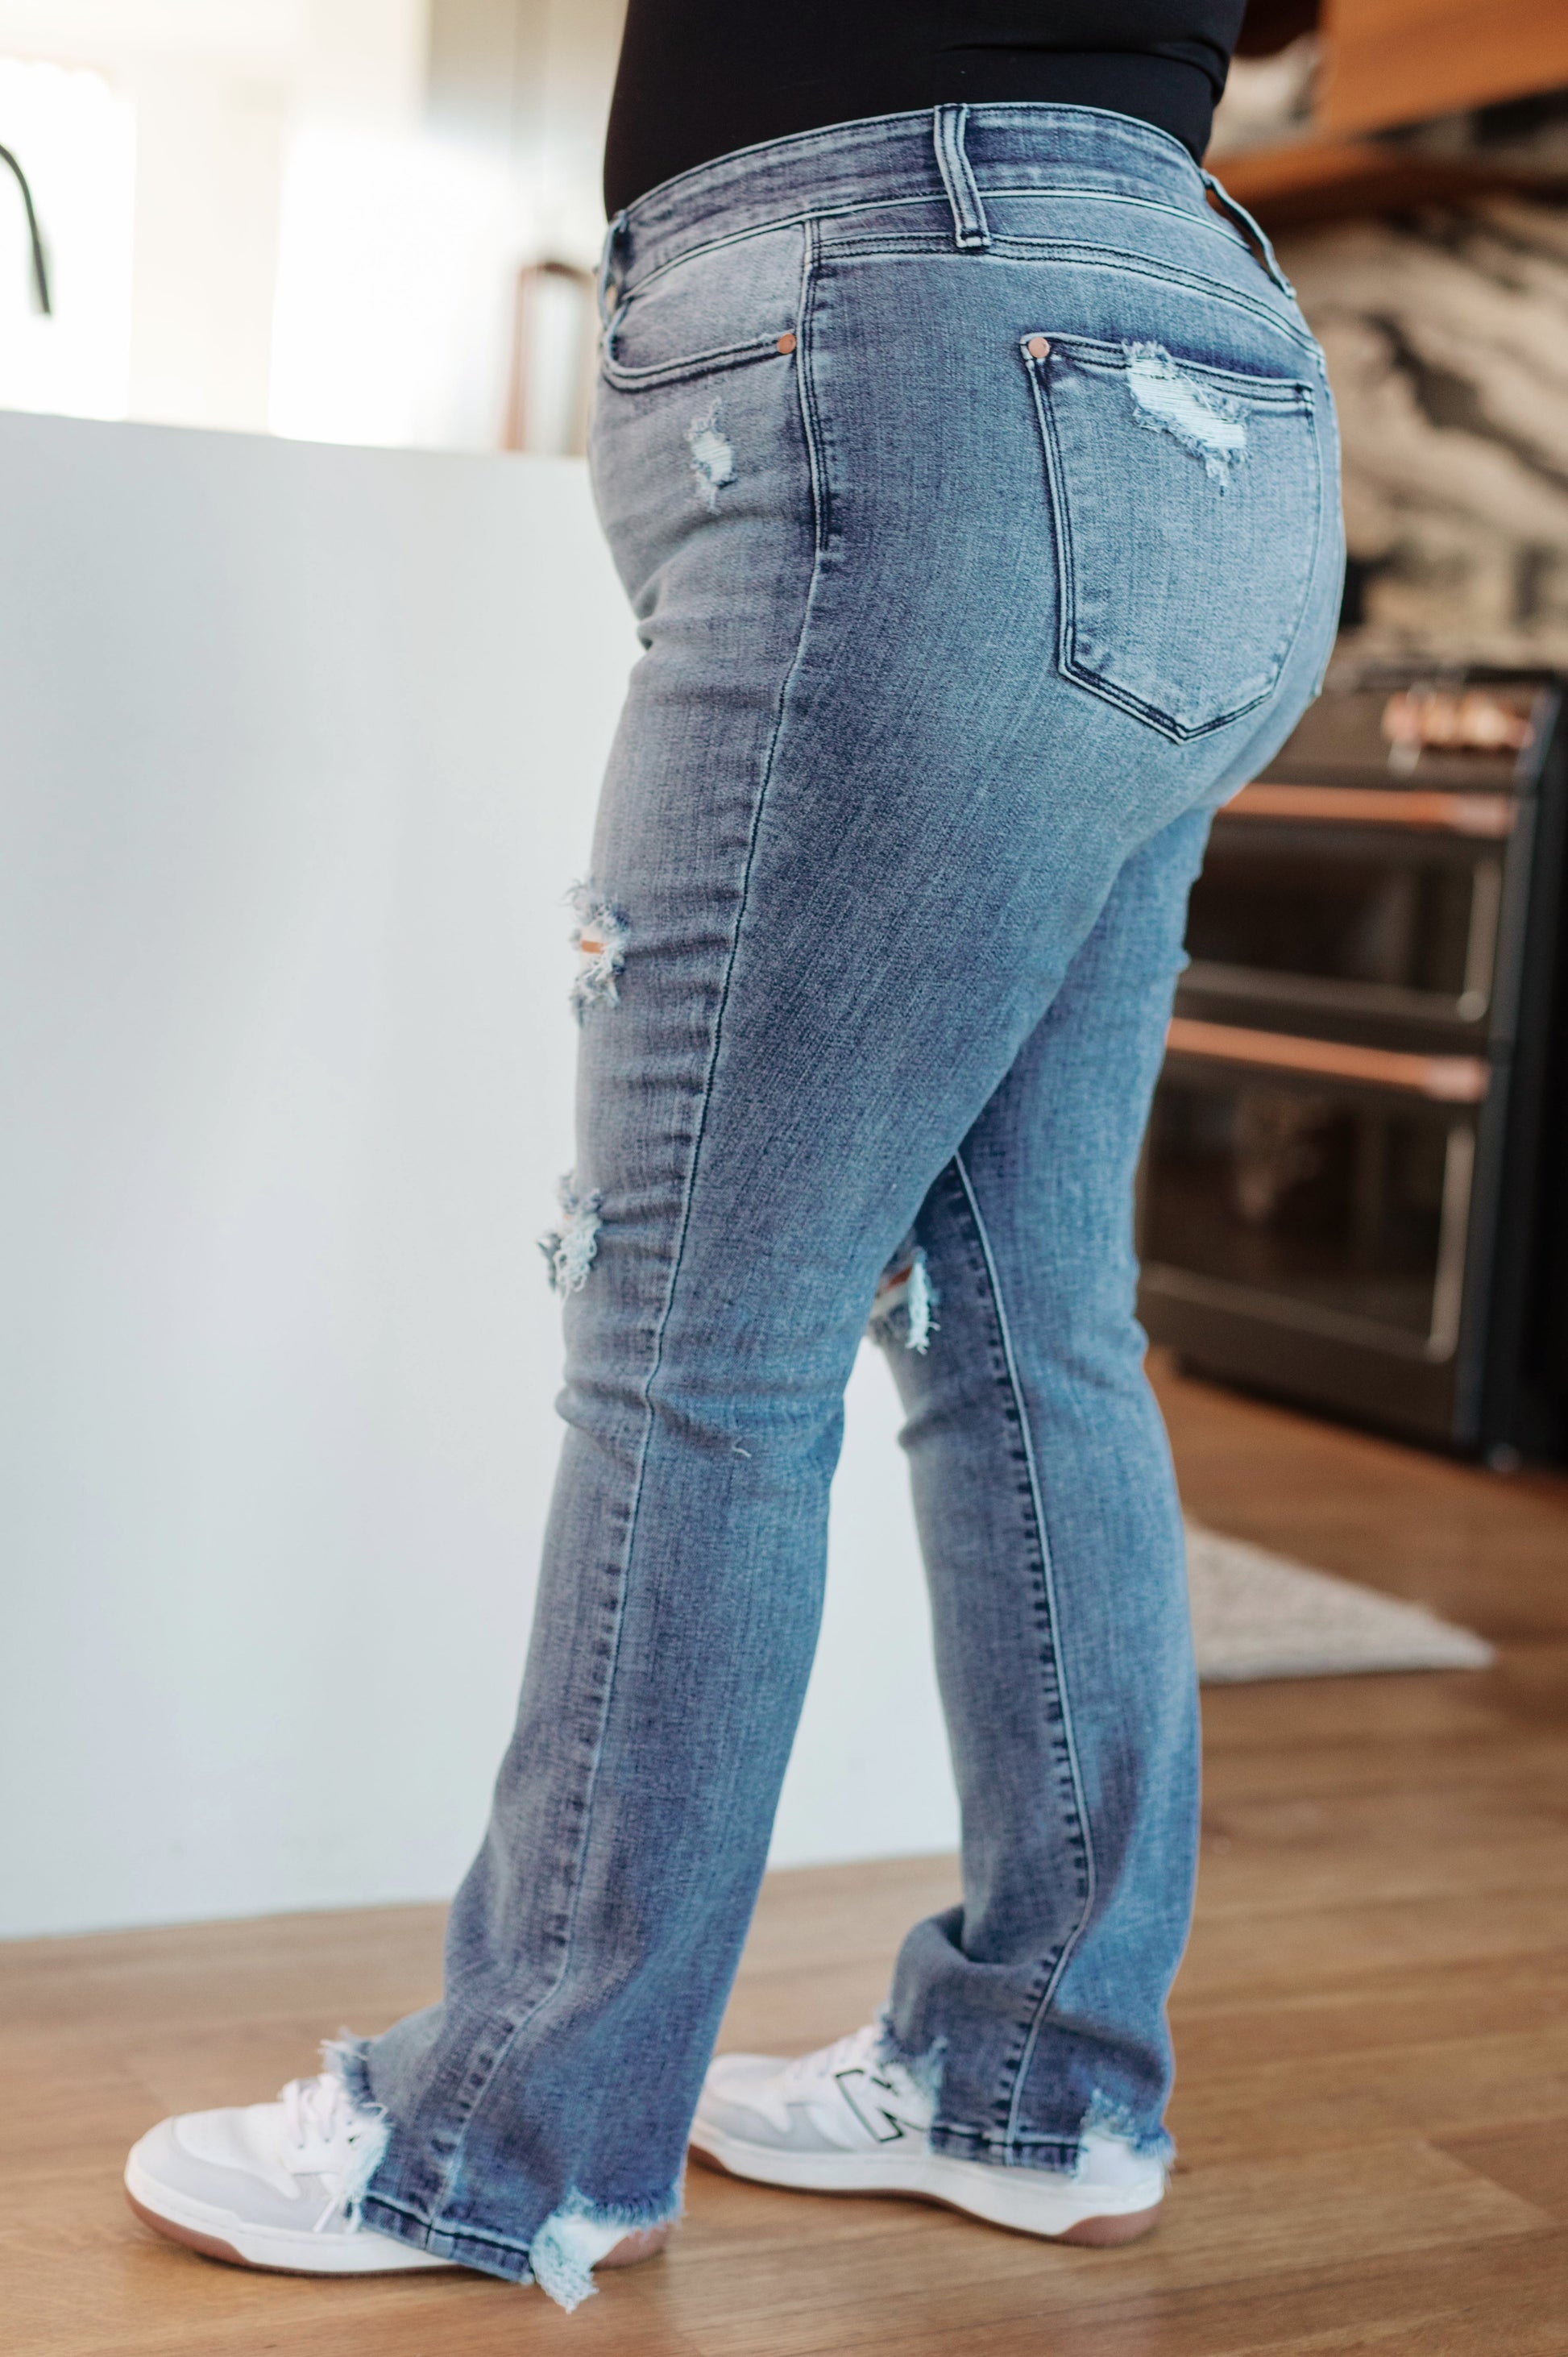 The O'Hara Destroyed Straight Jeans have the perfect balance of style, versatility, and timelessness! Featuring a stretch denim that shapes a mid rise waist with a five pocket cut and zipper fly. A slim fit through the thigh flares out at the ankle creating a straight cut silhouette. To top it off- these jeans have the perfect amount of distressing for an effortless cool girl look! 0 - 24W